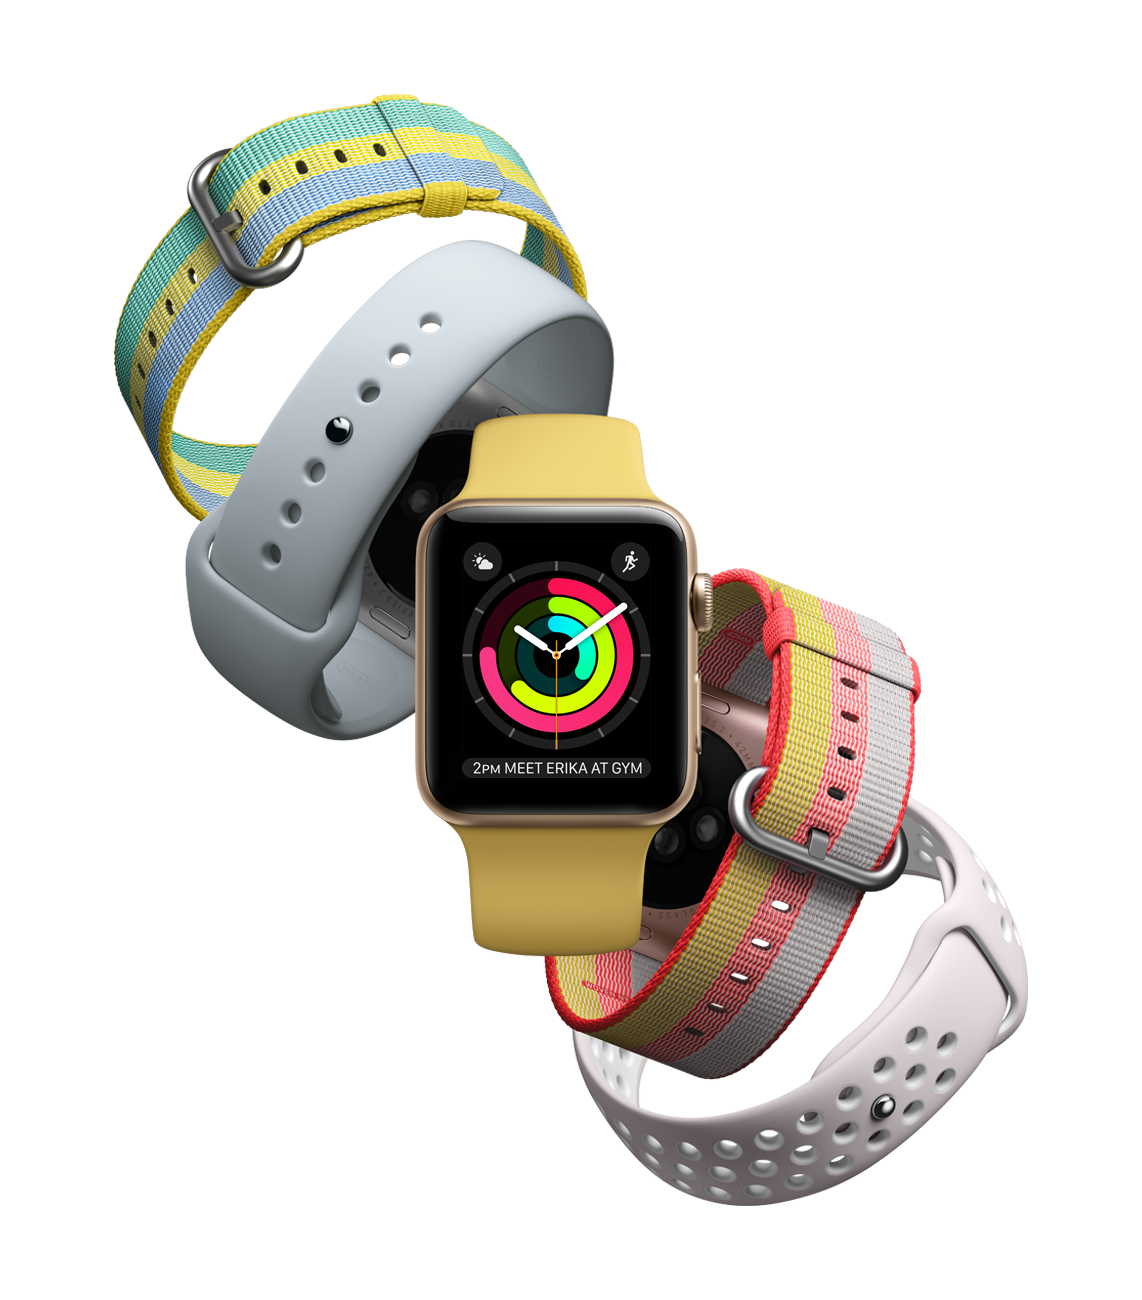 Get $70 Off Apple Watch Series 2 at Best Buy in Time for Father's Day